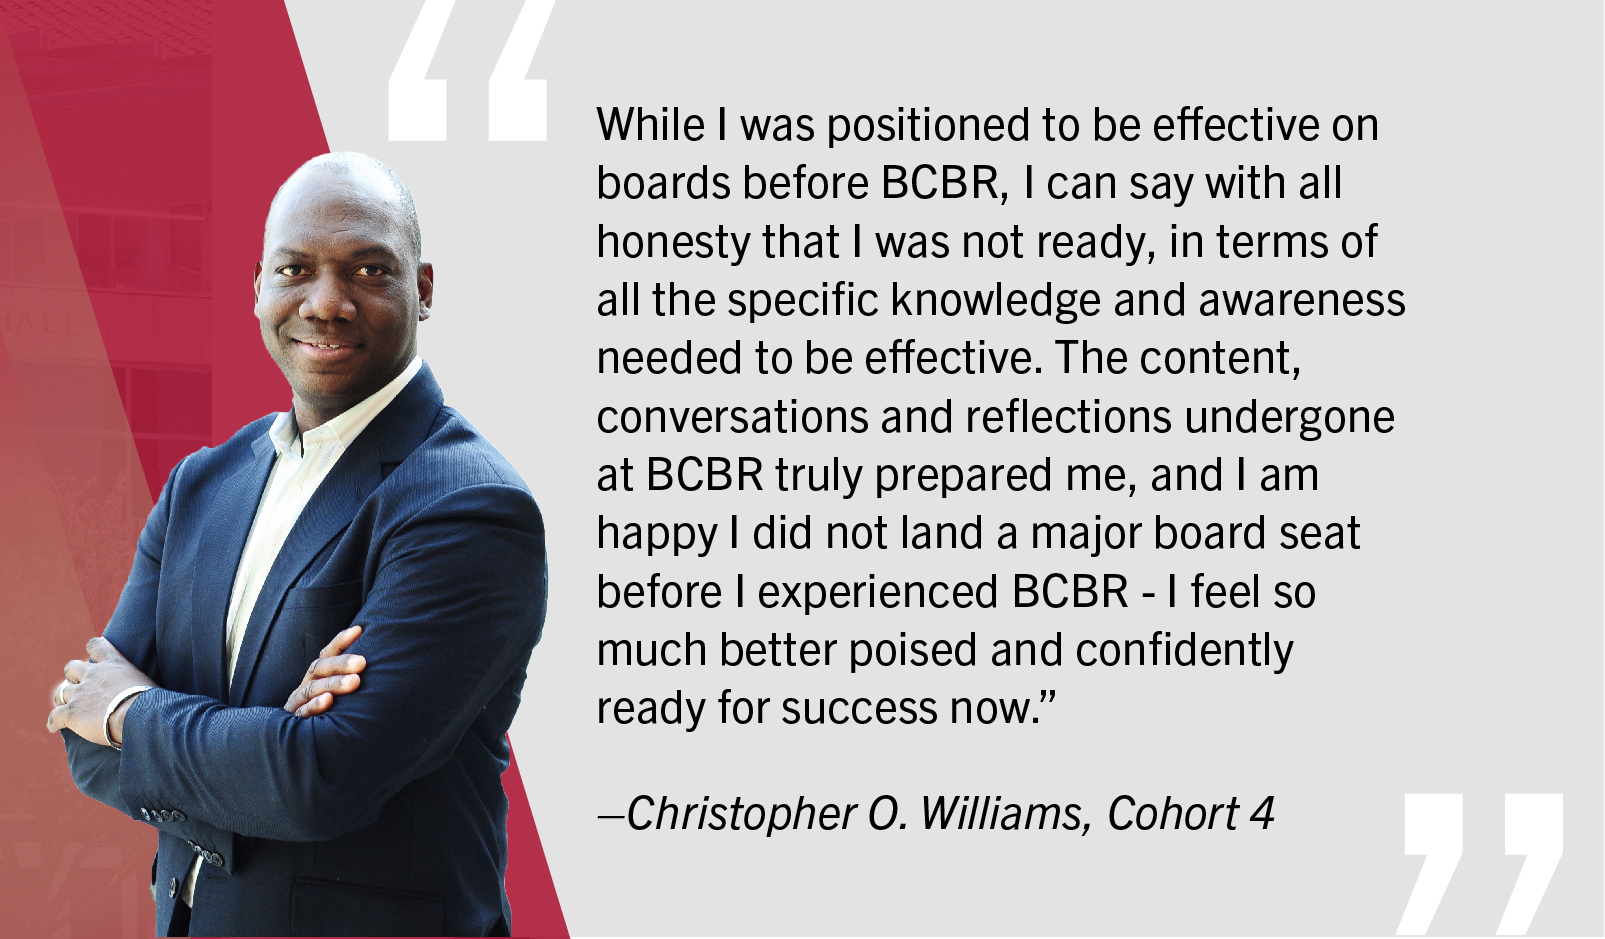 Quote by Christopher O. Williams, Cohort 4